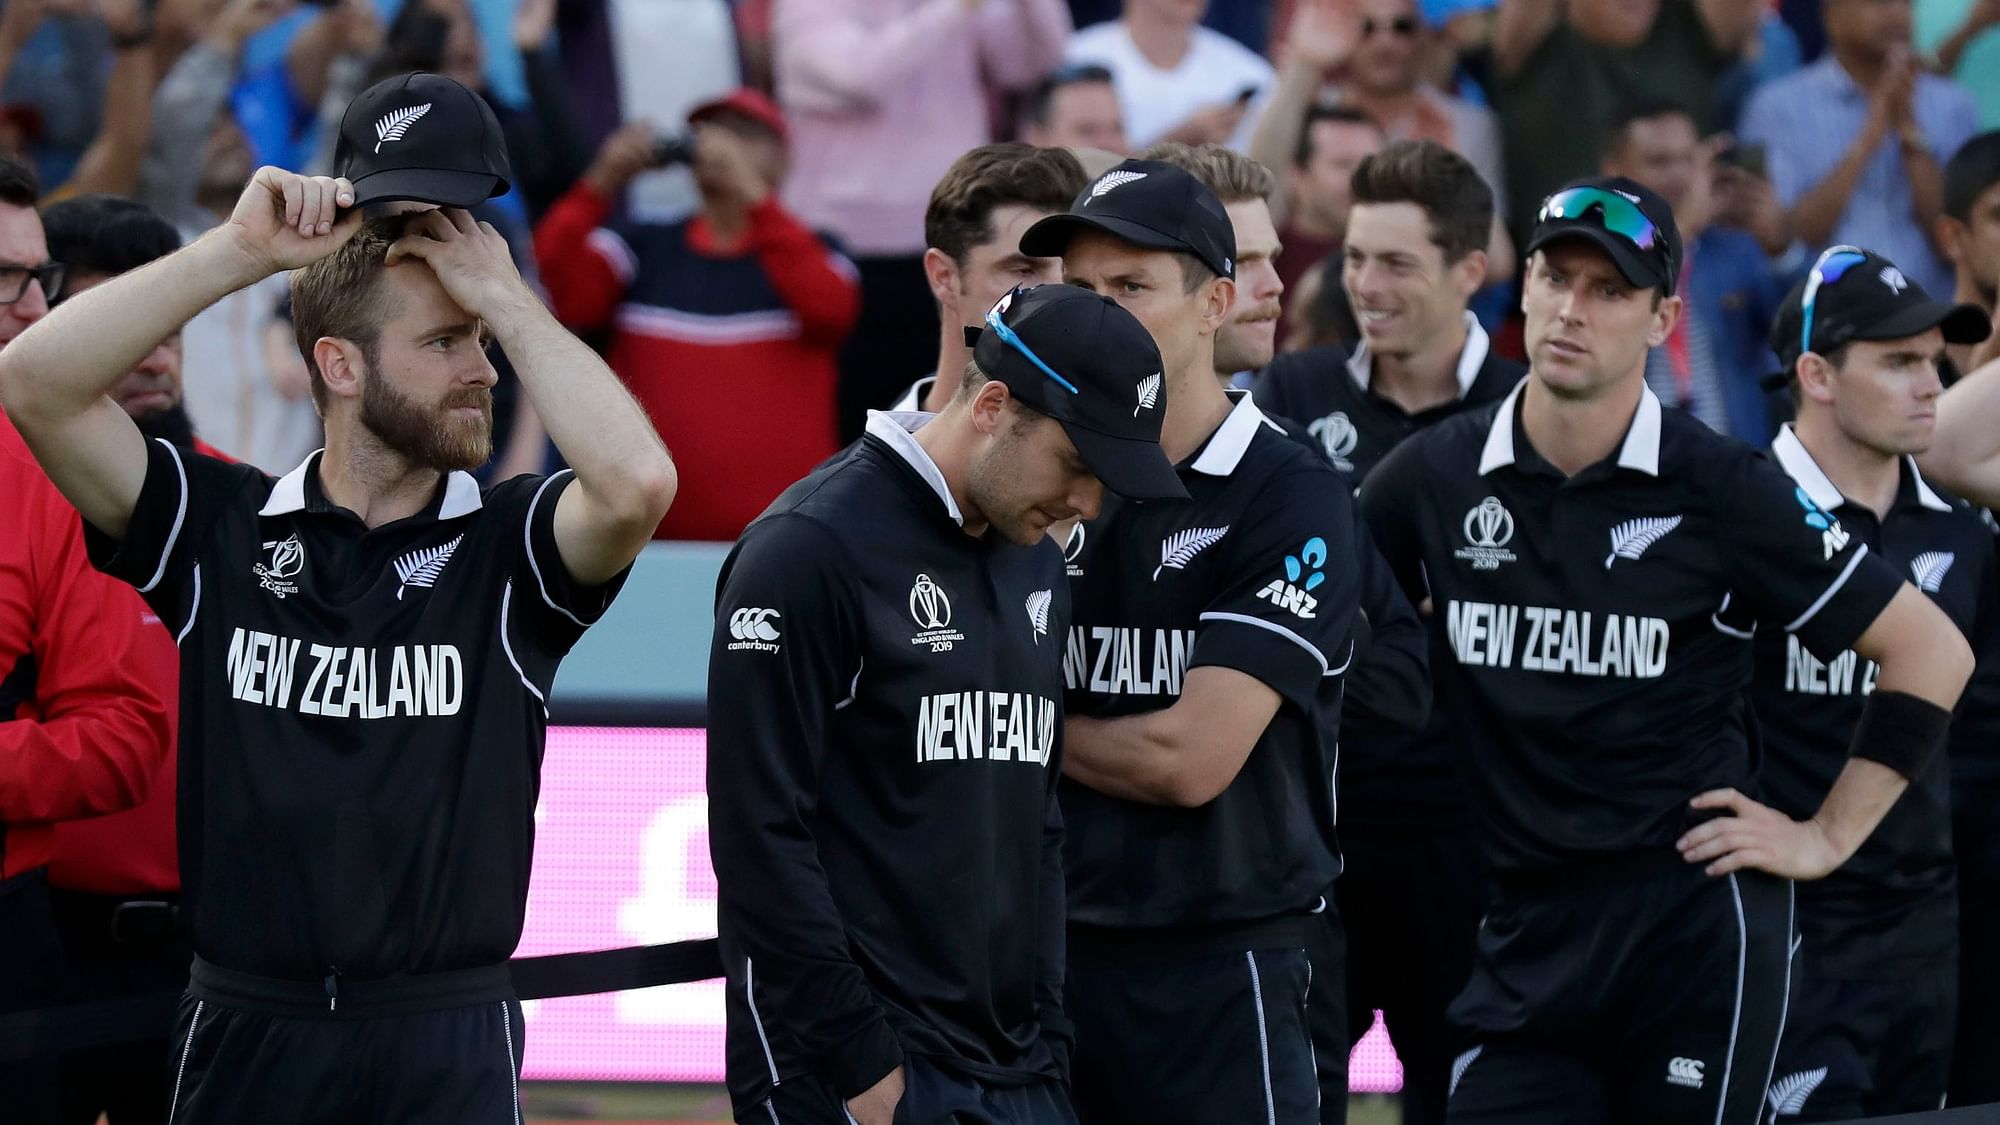 An all-night vigil by New Zealand fans ended in bitter disappointment when they saw their team beaten by England after an unprecedented Super Over.